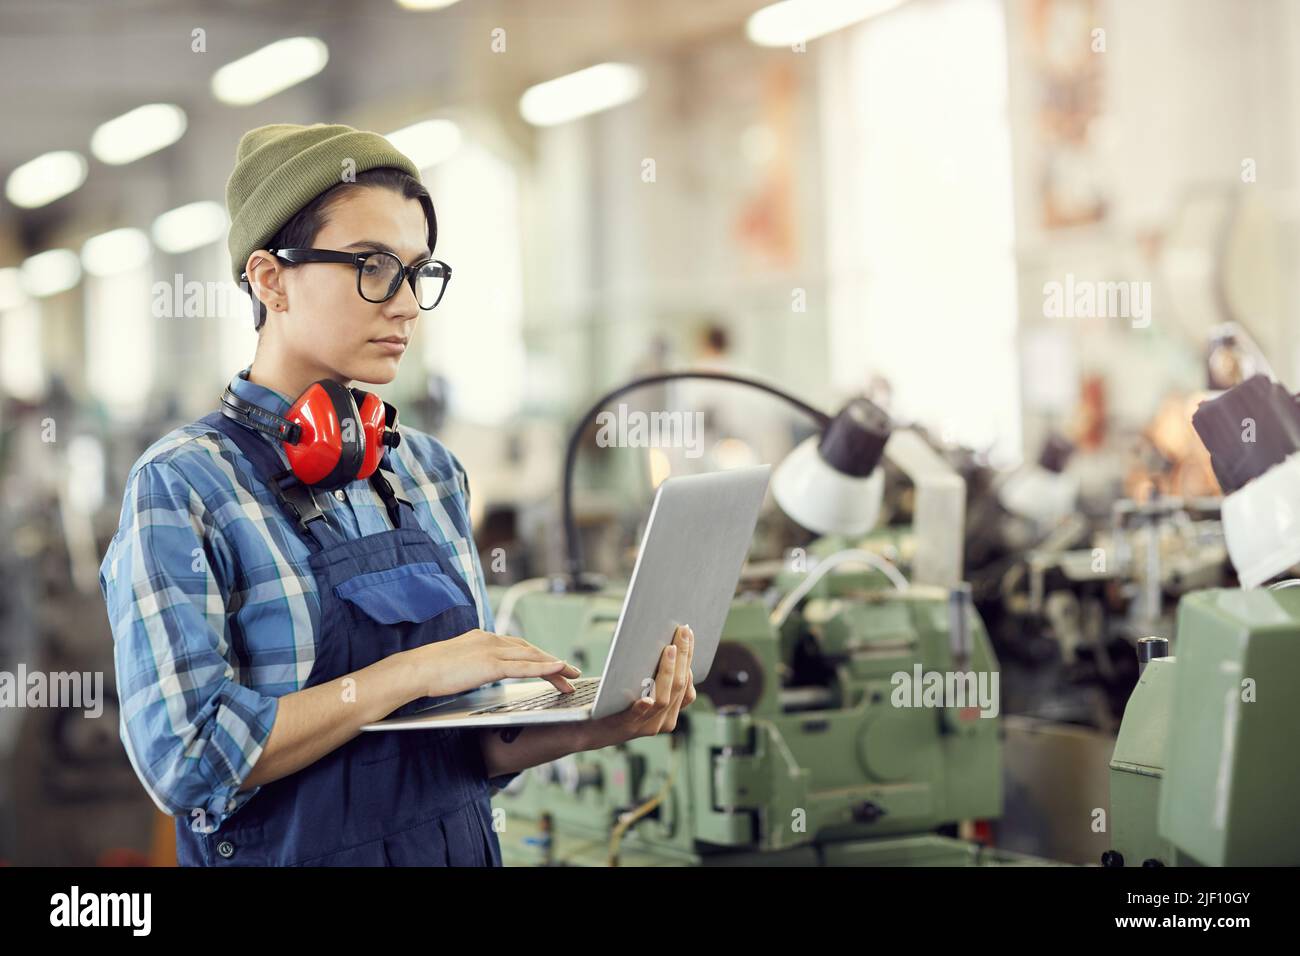 Serious focused young female industrial engineer in beanie hat and eyewear standing in factory shop full of lathes and using laptop Stock Photo